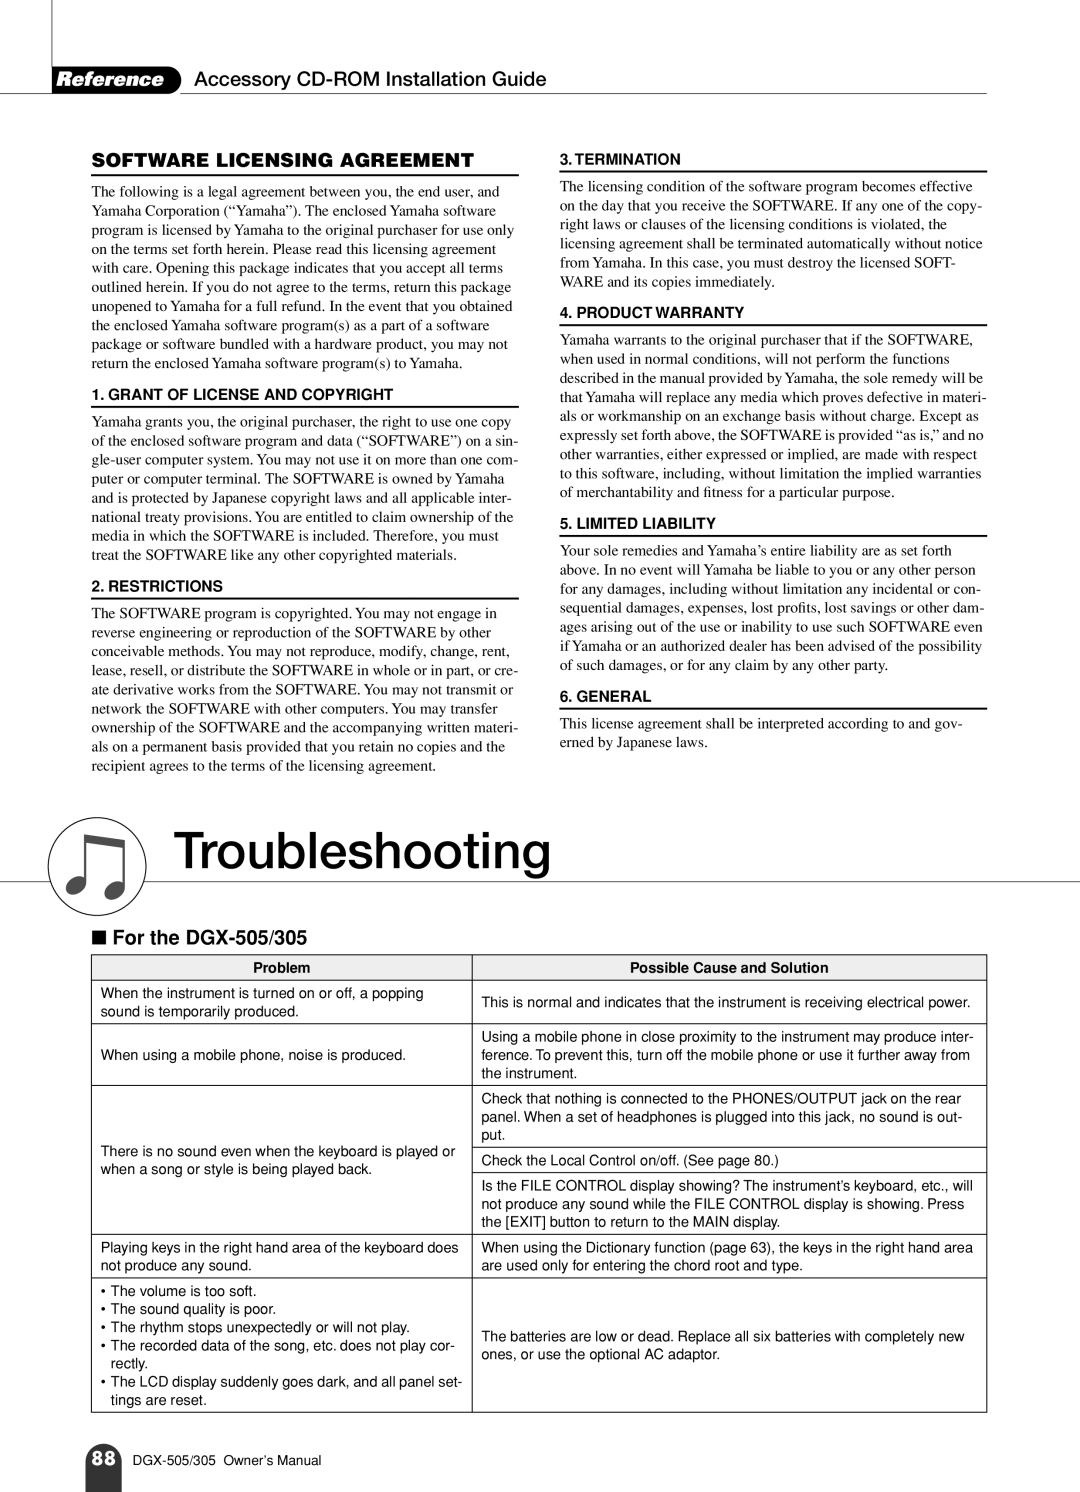 Yamaha Troubleshooting, Reference Accessory CD-ROM Installation Guide, For the DGX-505/305, Restrictions, Termination 